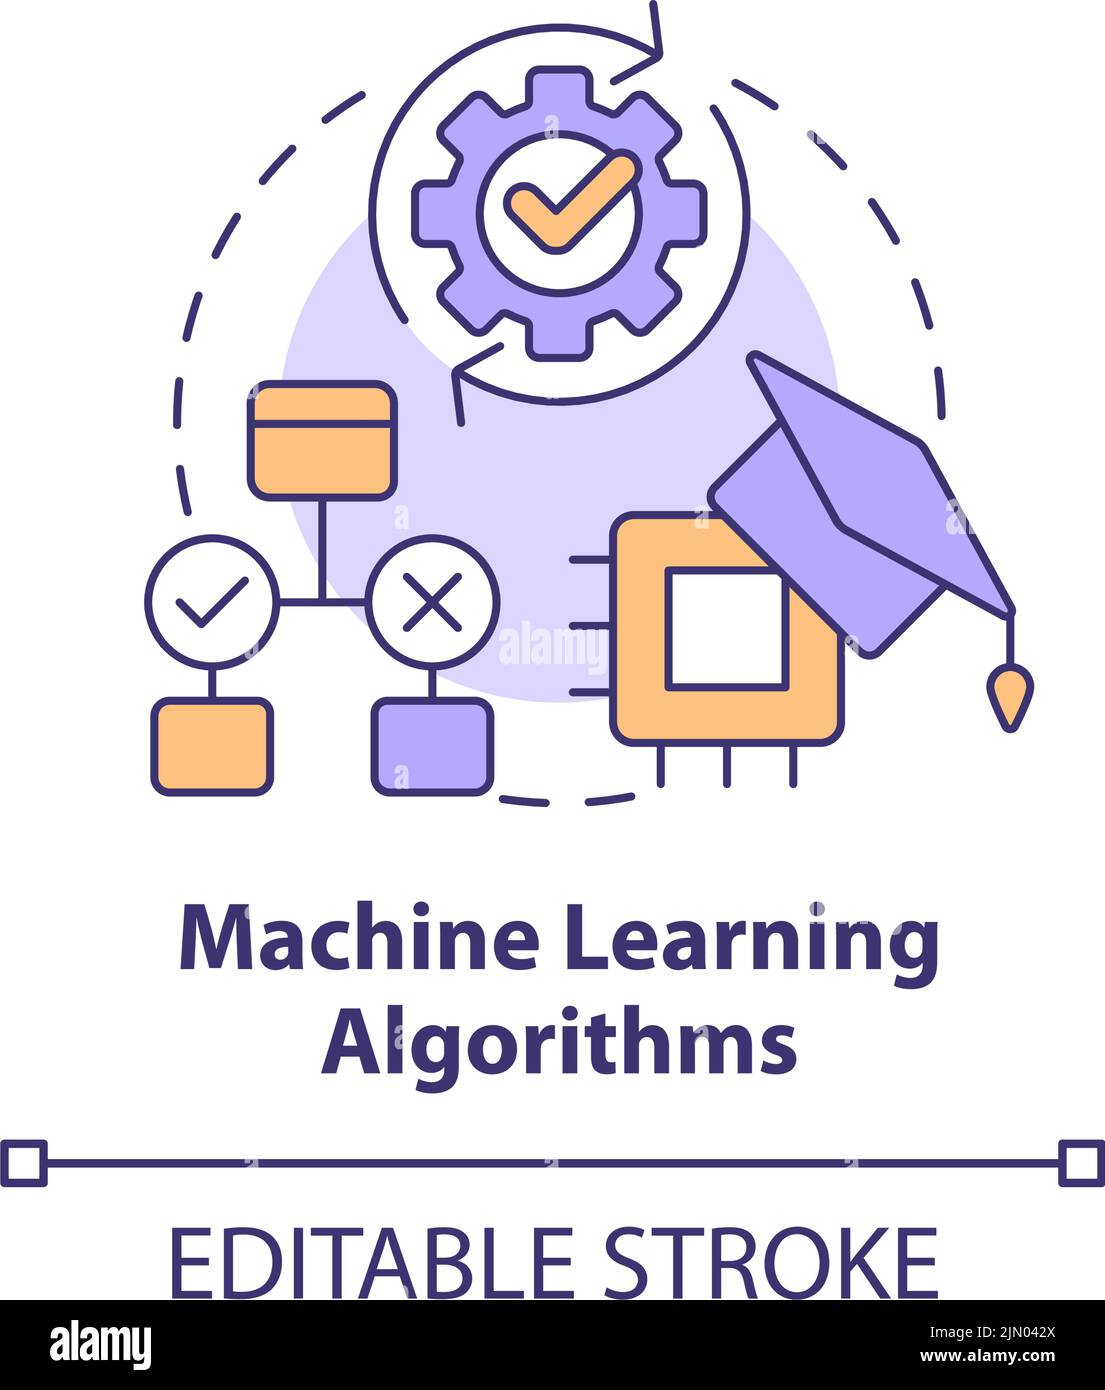 Machine learning algorithms concept icon Stock Vector